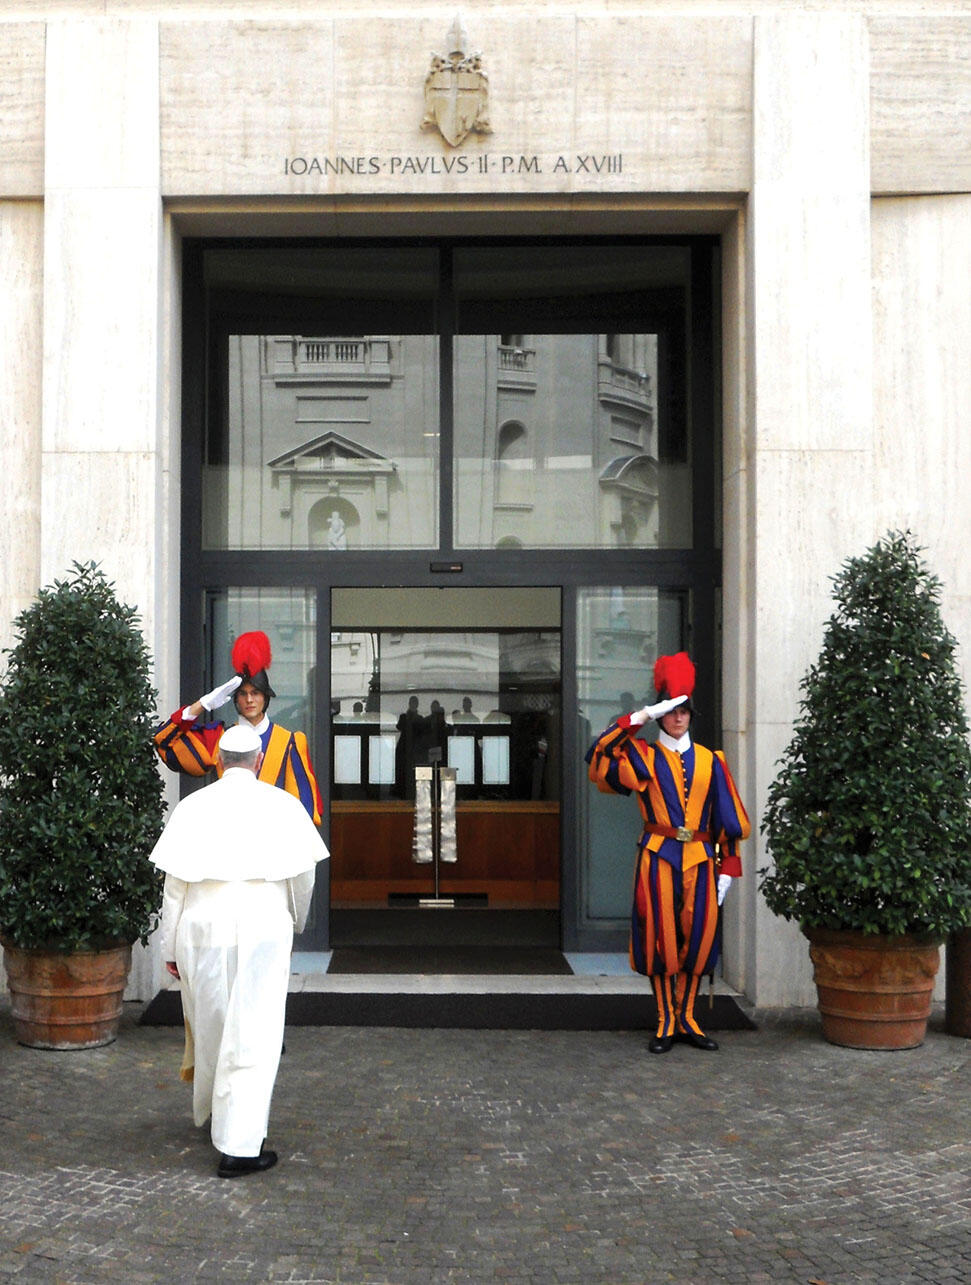 Pope Francis passes Vatican Swiss Guards and enters the Domus Sanctae Marthae. (Photo by Pufui Pc Pifpef I/Wikimedia Commons.)